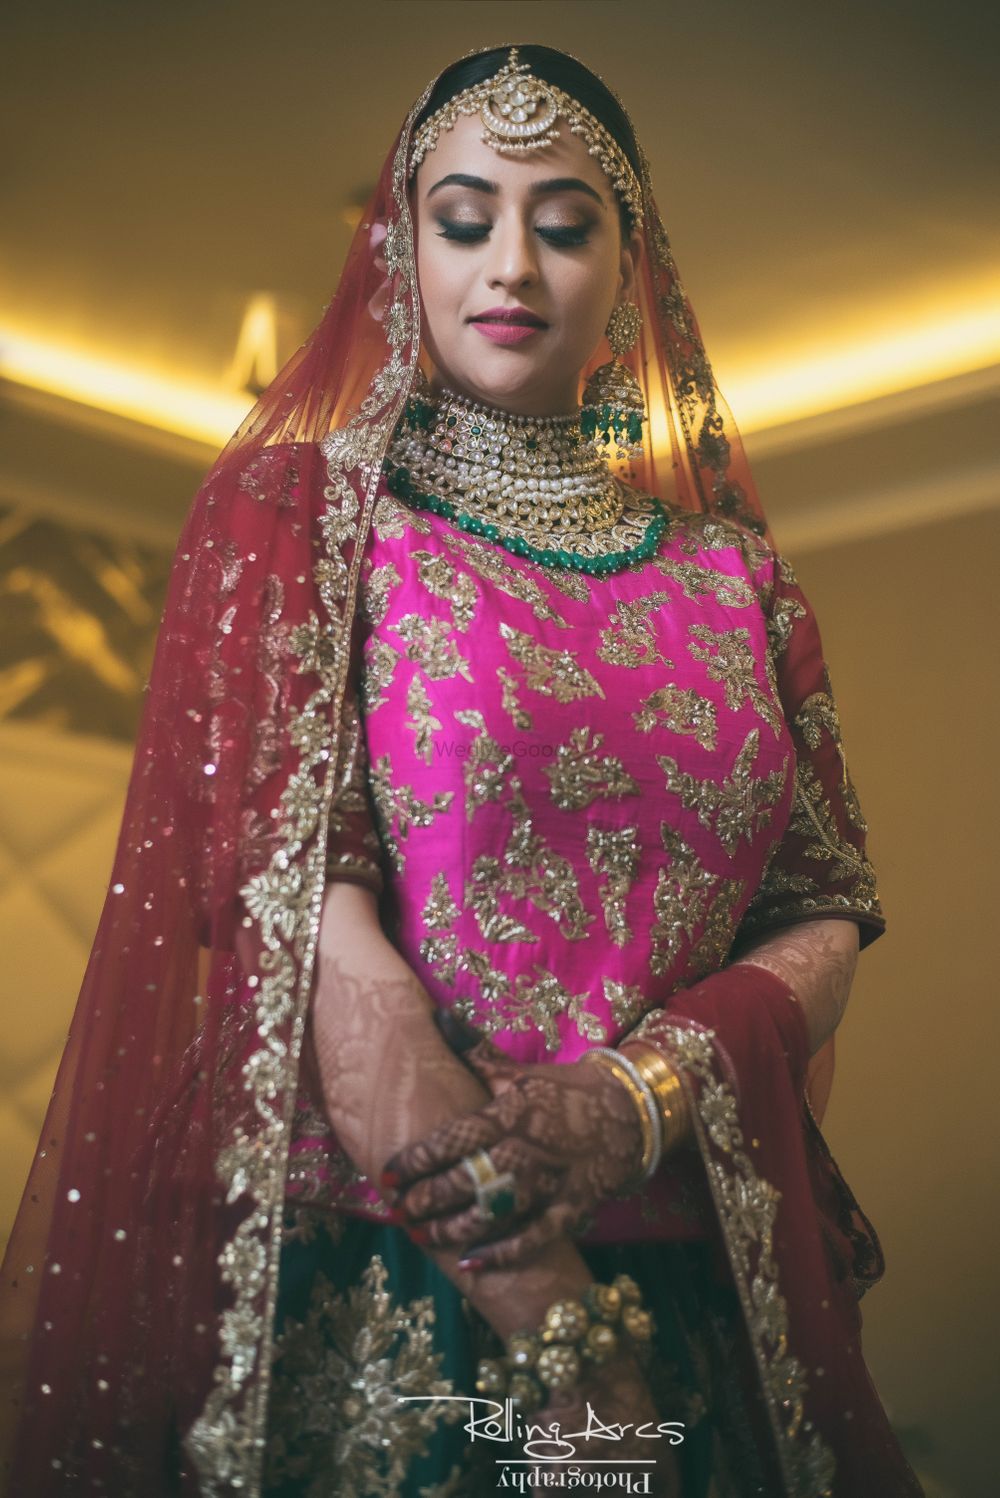 Photo of Bride in pink and green lehenga on her wedding day